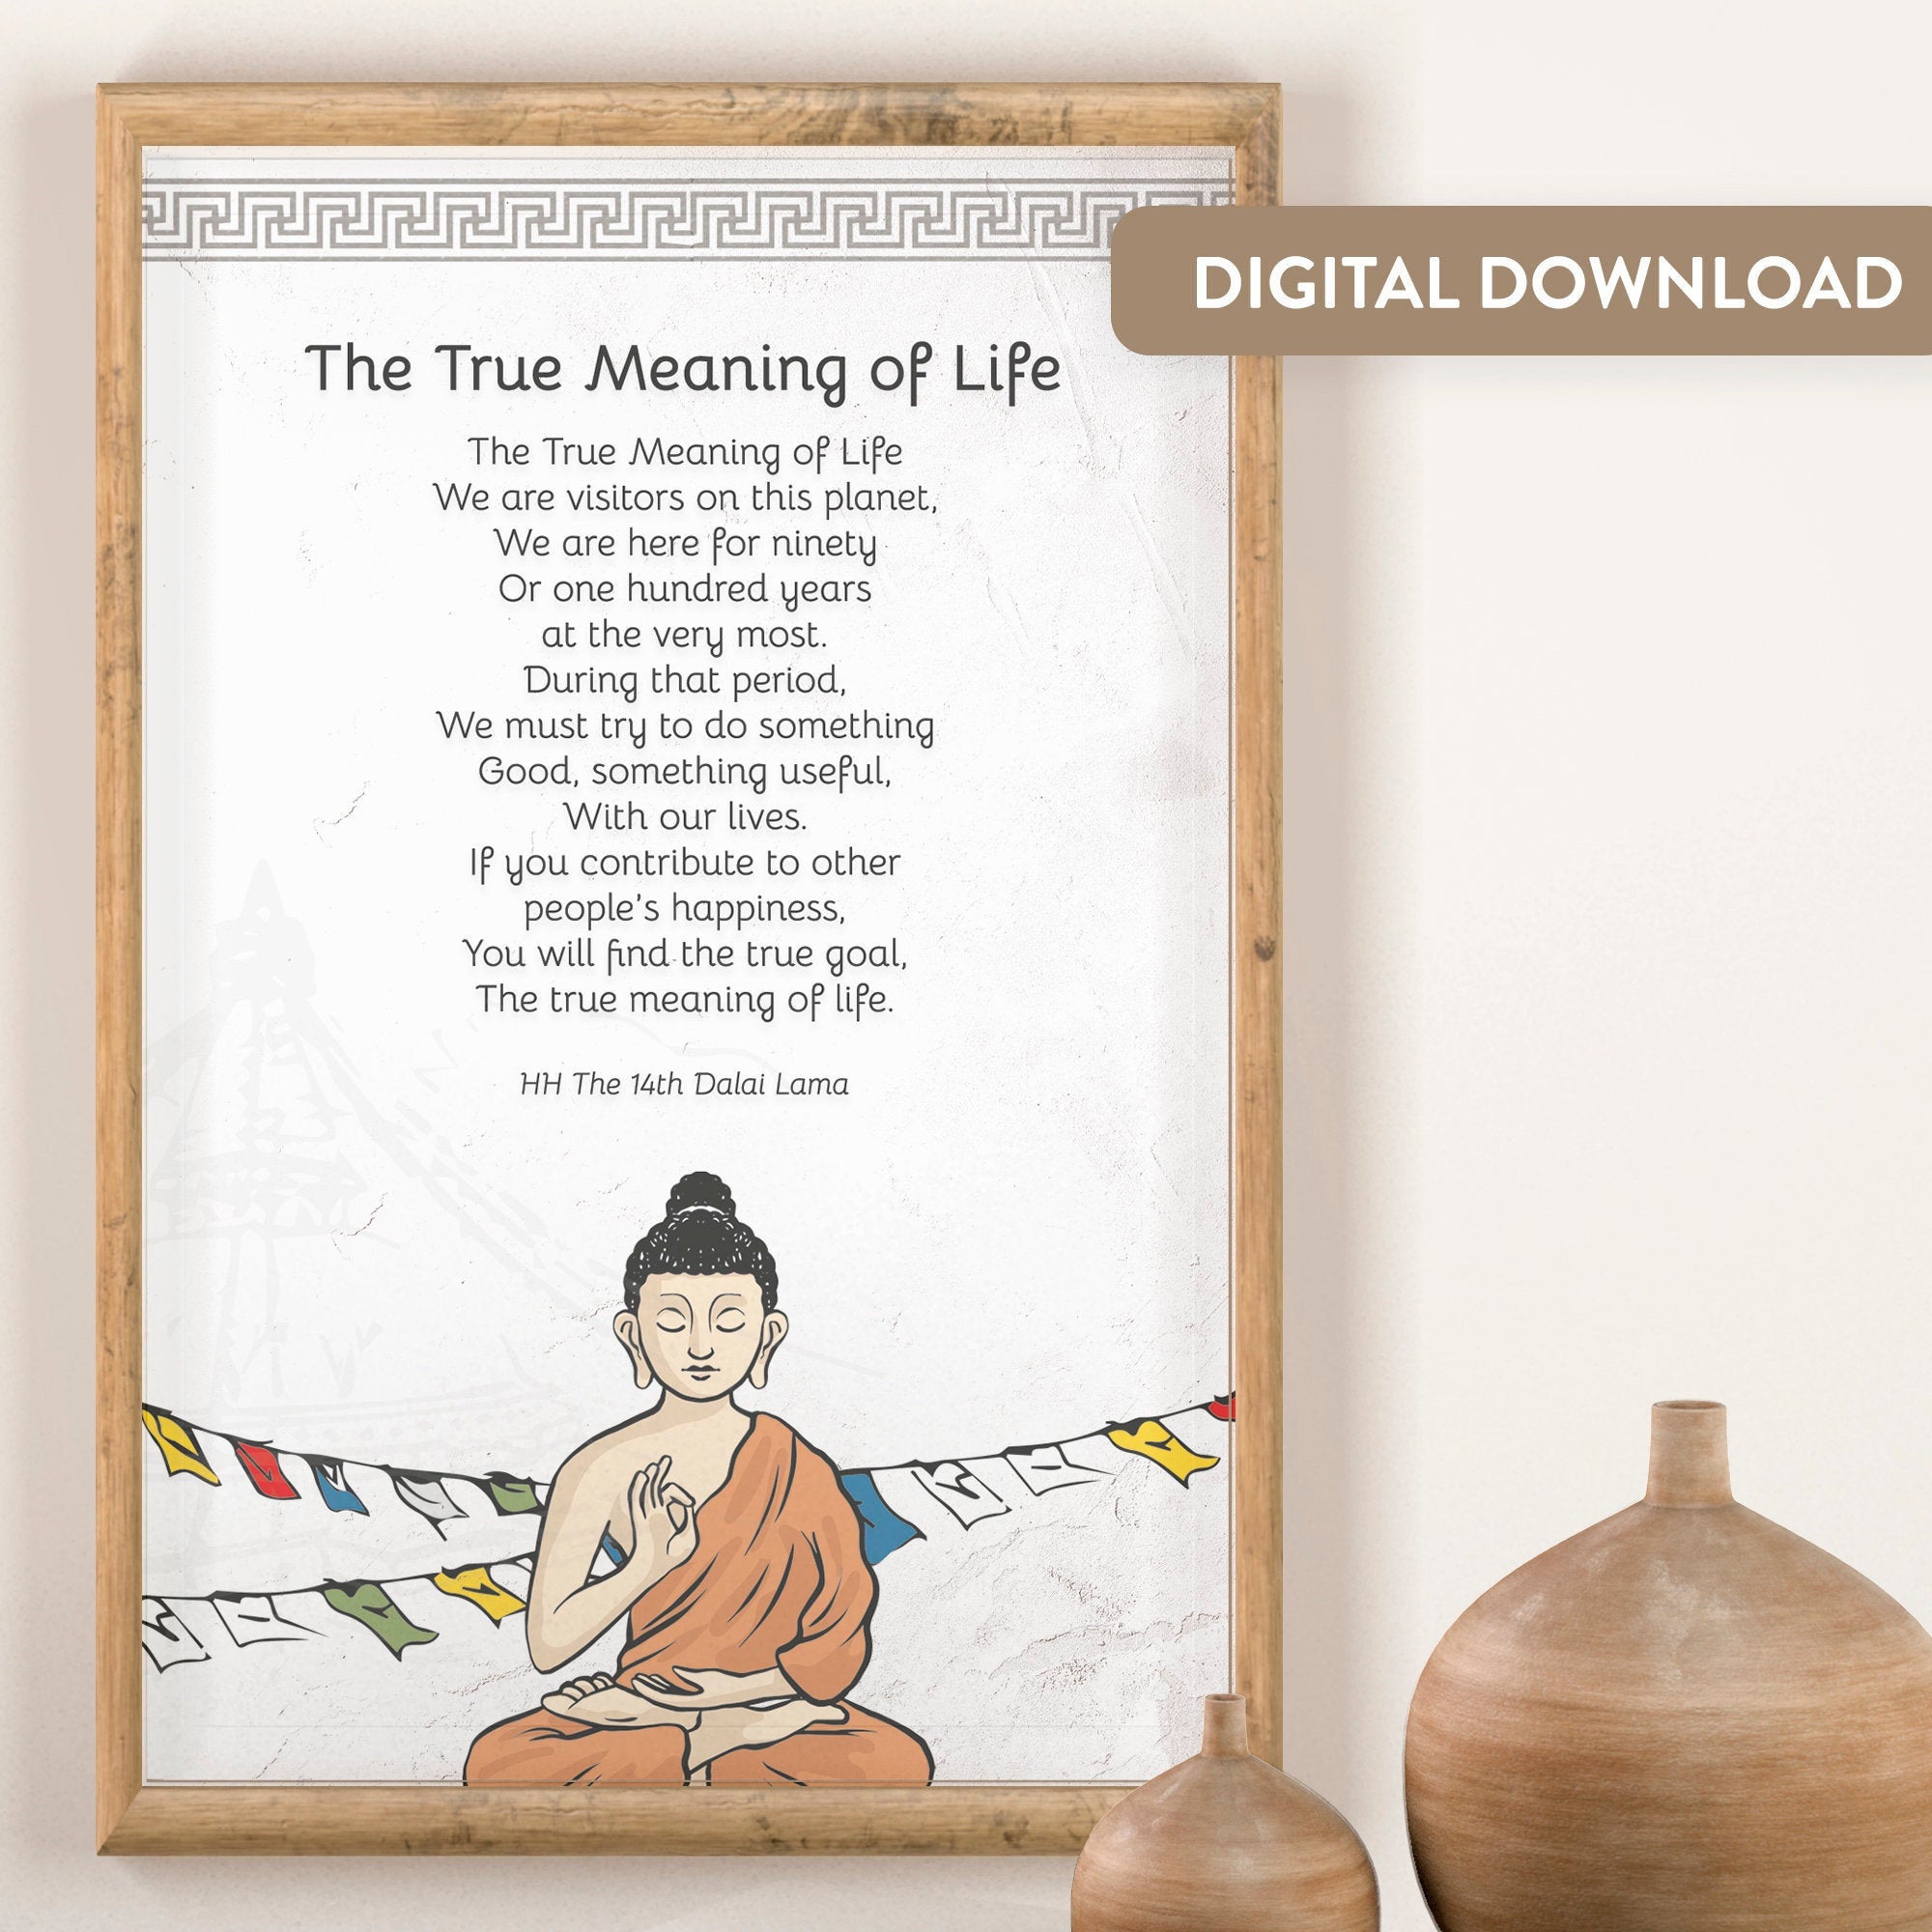 Quotes Prints for Cards, Wall art, Posters. &quot;The True Meaning of Life&quot; Wisdom quotes by HH the Dalai Lama for instant download.